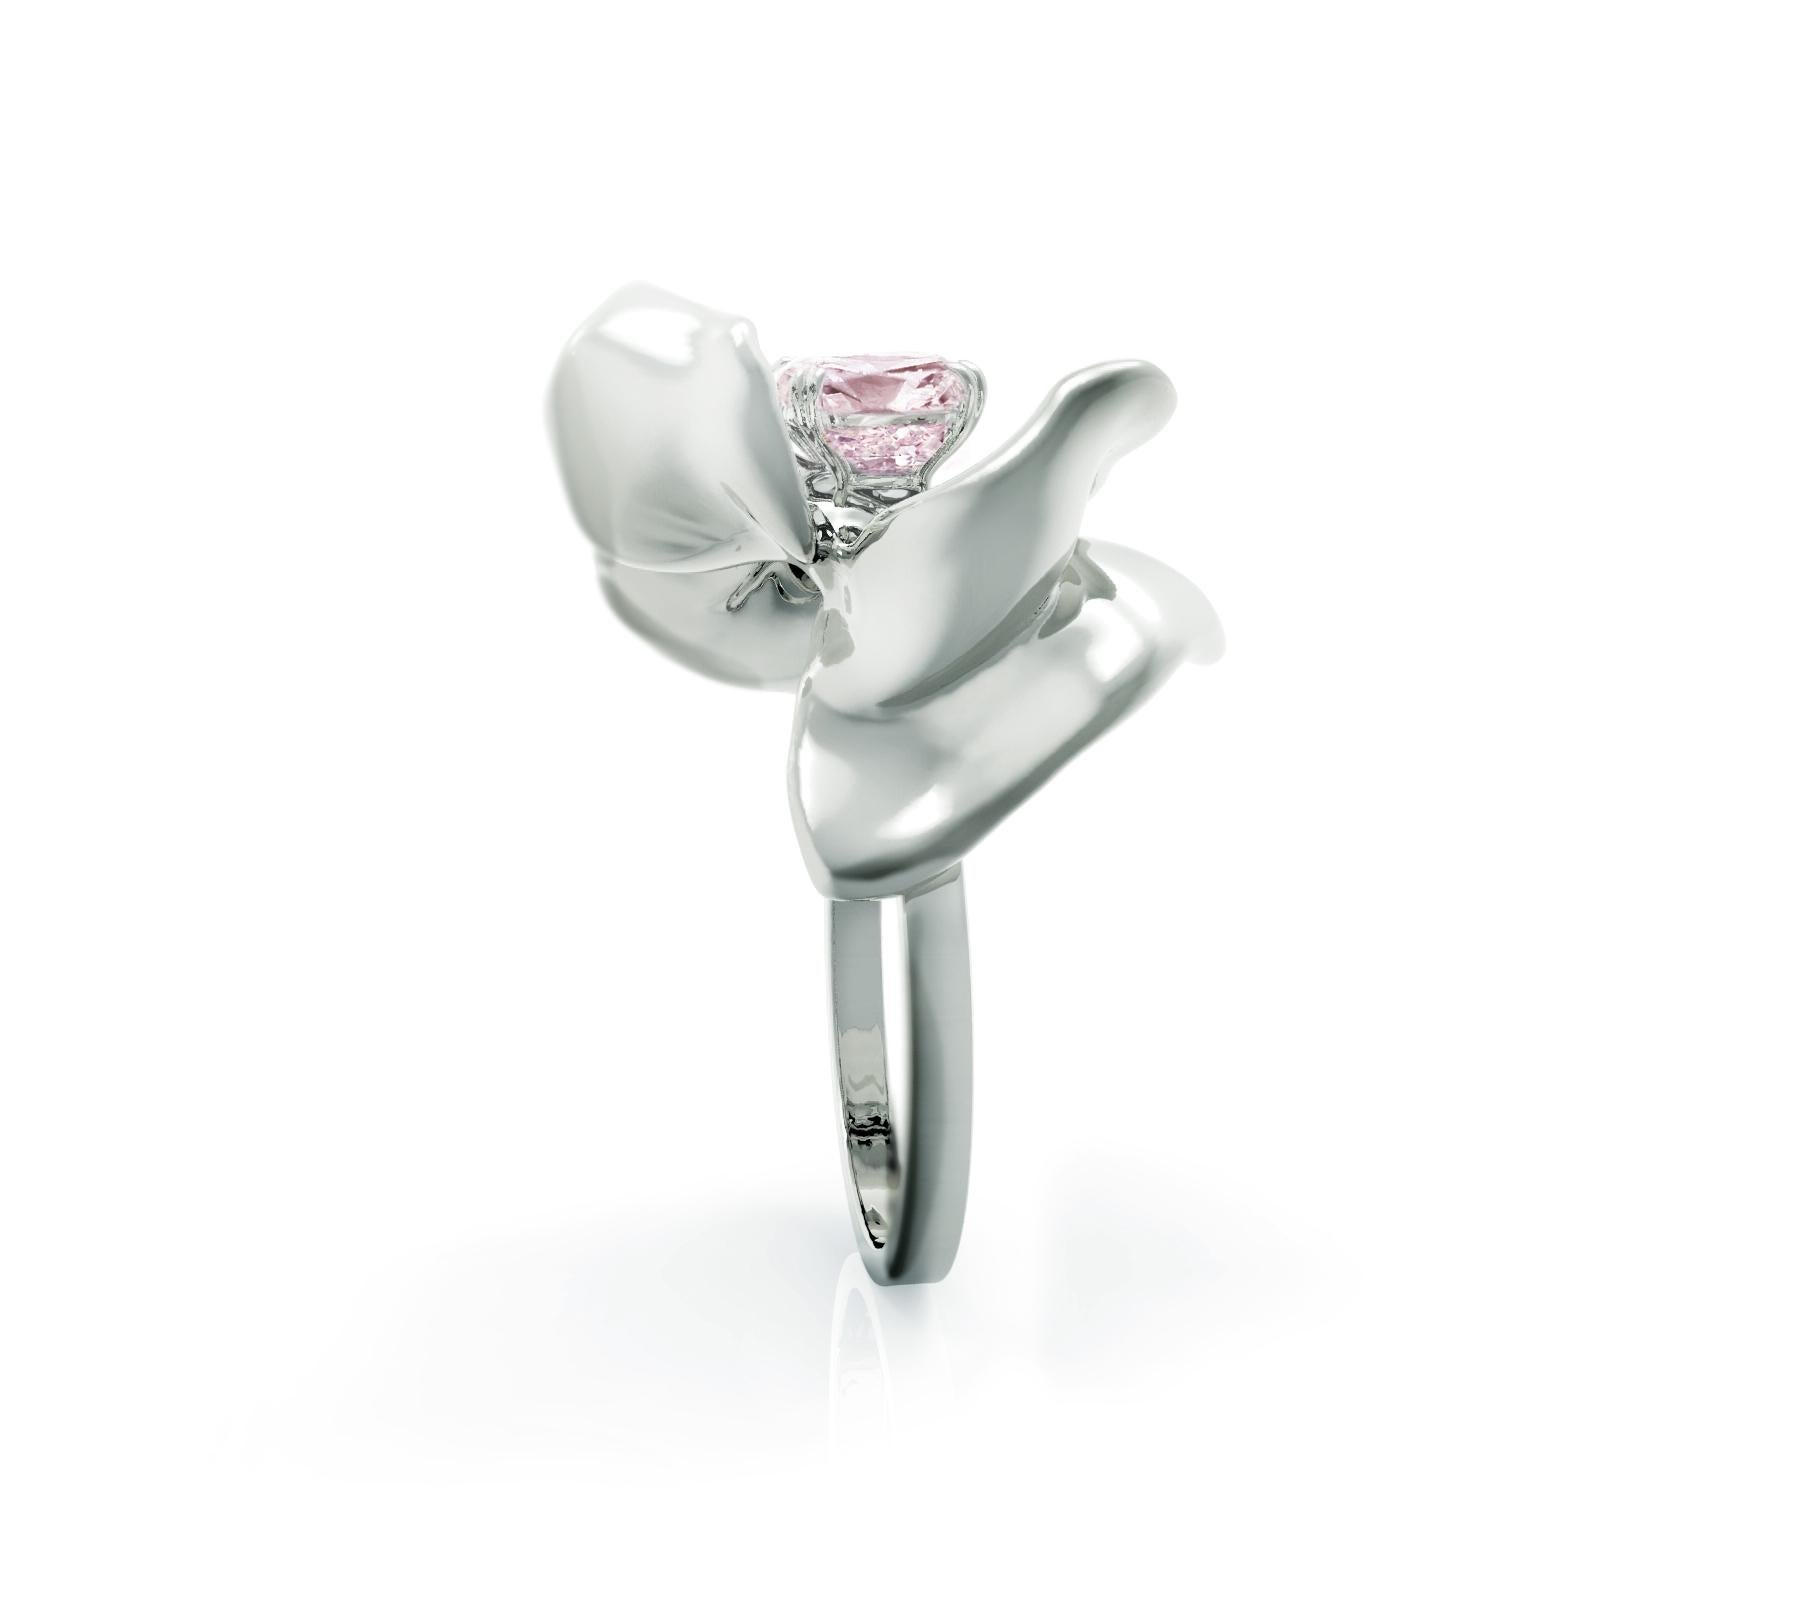 This Magnolia Flower contemporary cocktail ring is in 14 karat white gold with purple cushion spinel (1.34 carats). The tender water-surface of the spinel multiplies the light, mirroring on the golden petals. The weight is about 8.5 gr.

The piece